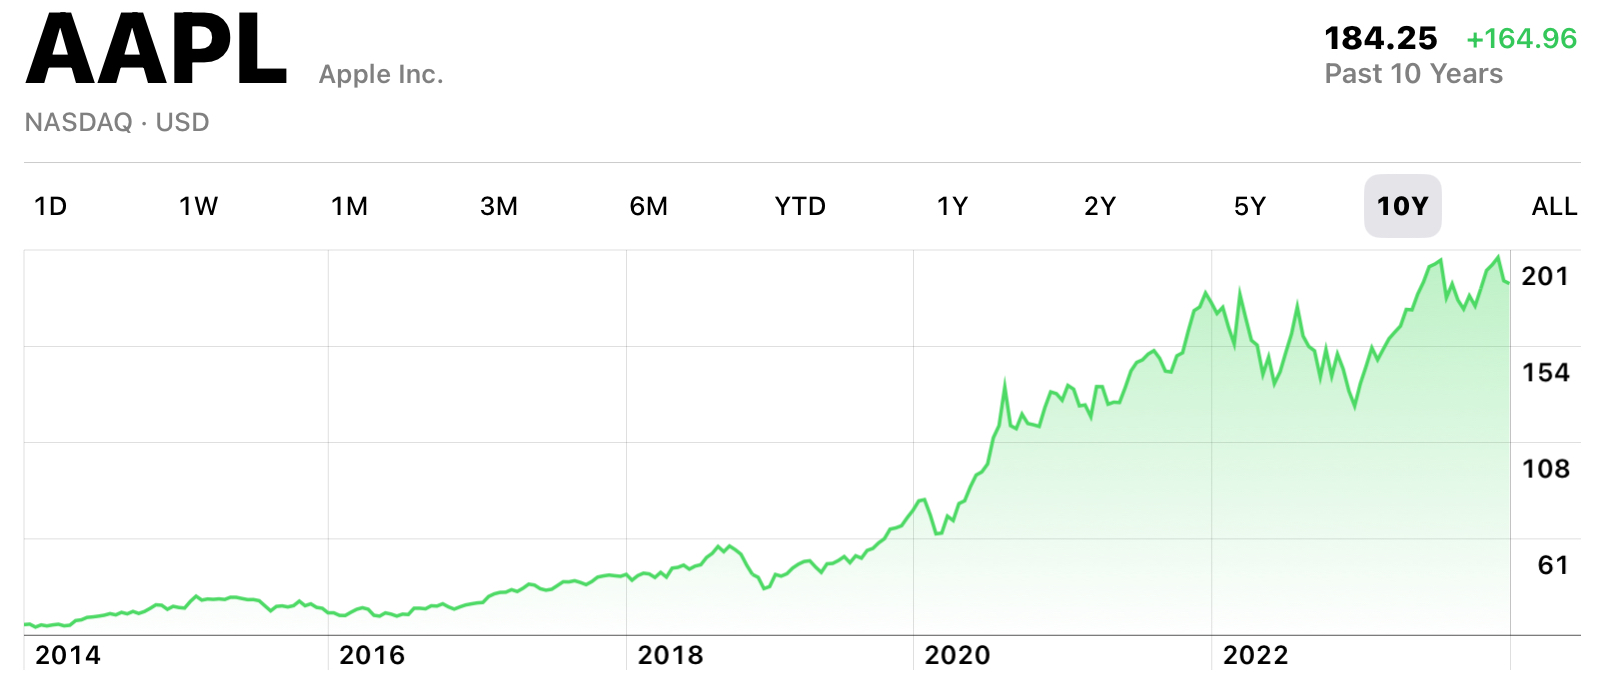 10 year stock proce for Apple